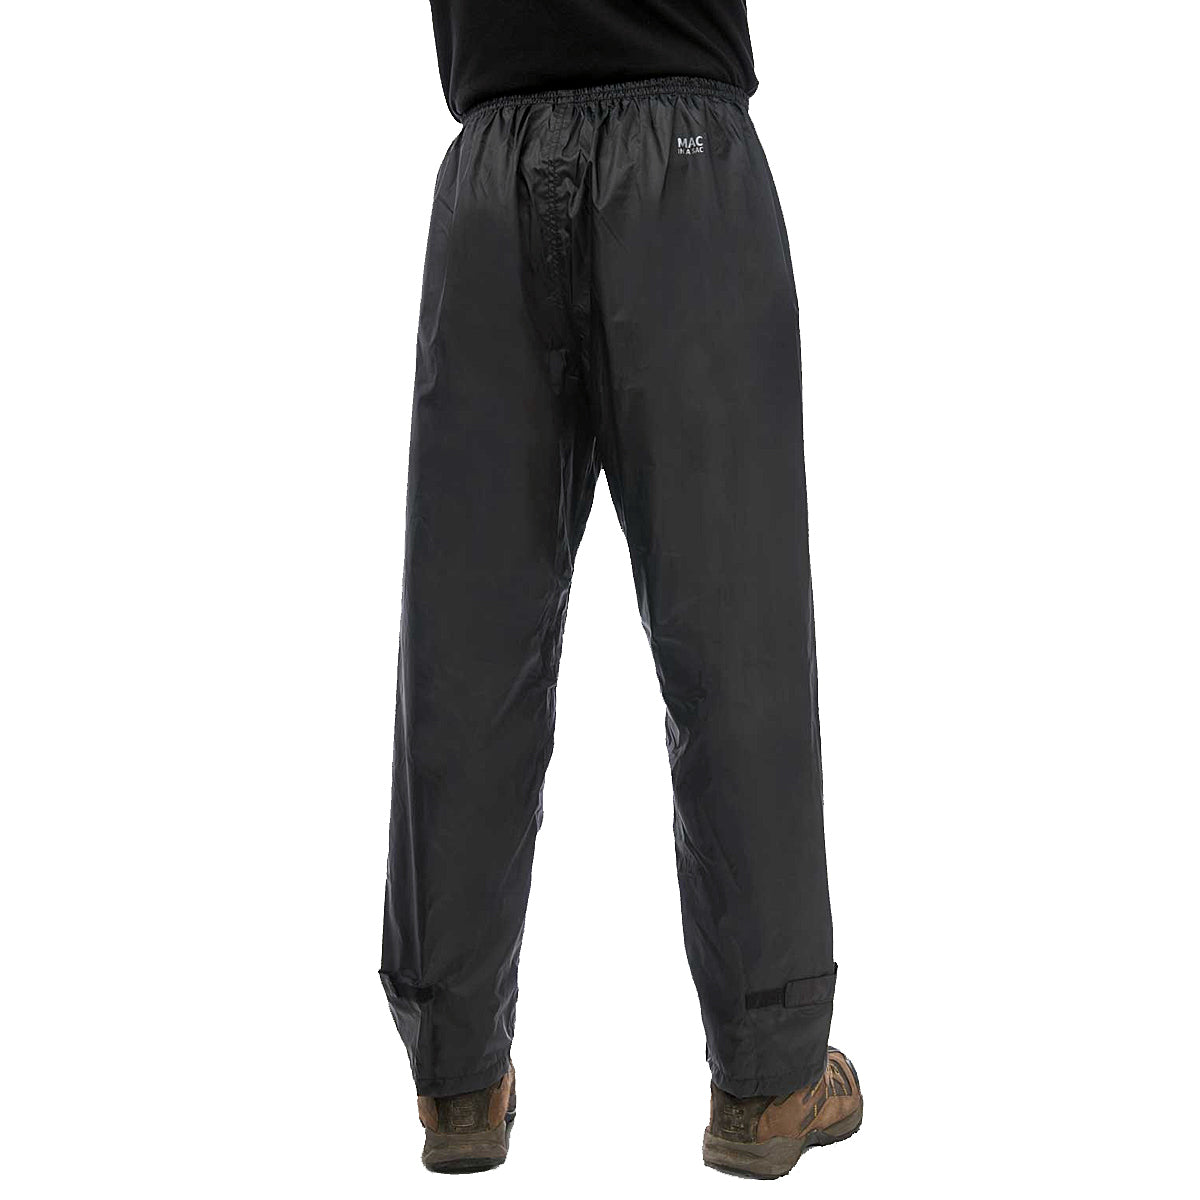 Mac In A Sac Packable Unisex Adults Waterproof Overtrousers/Pant